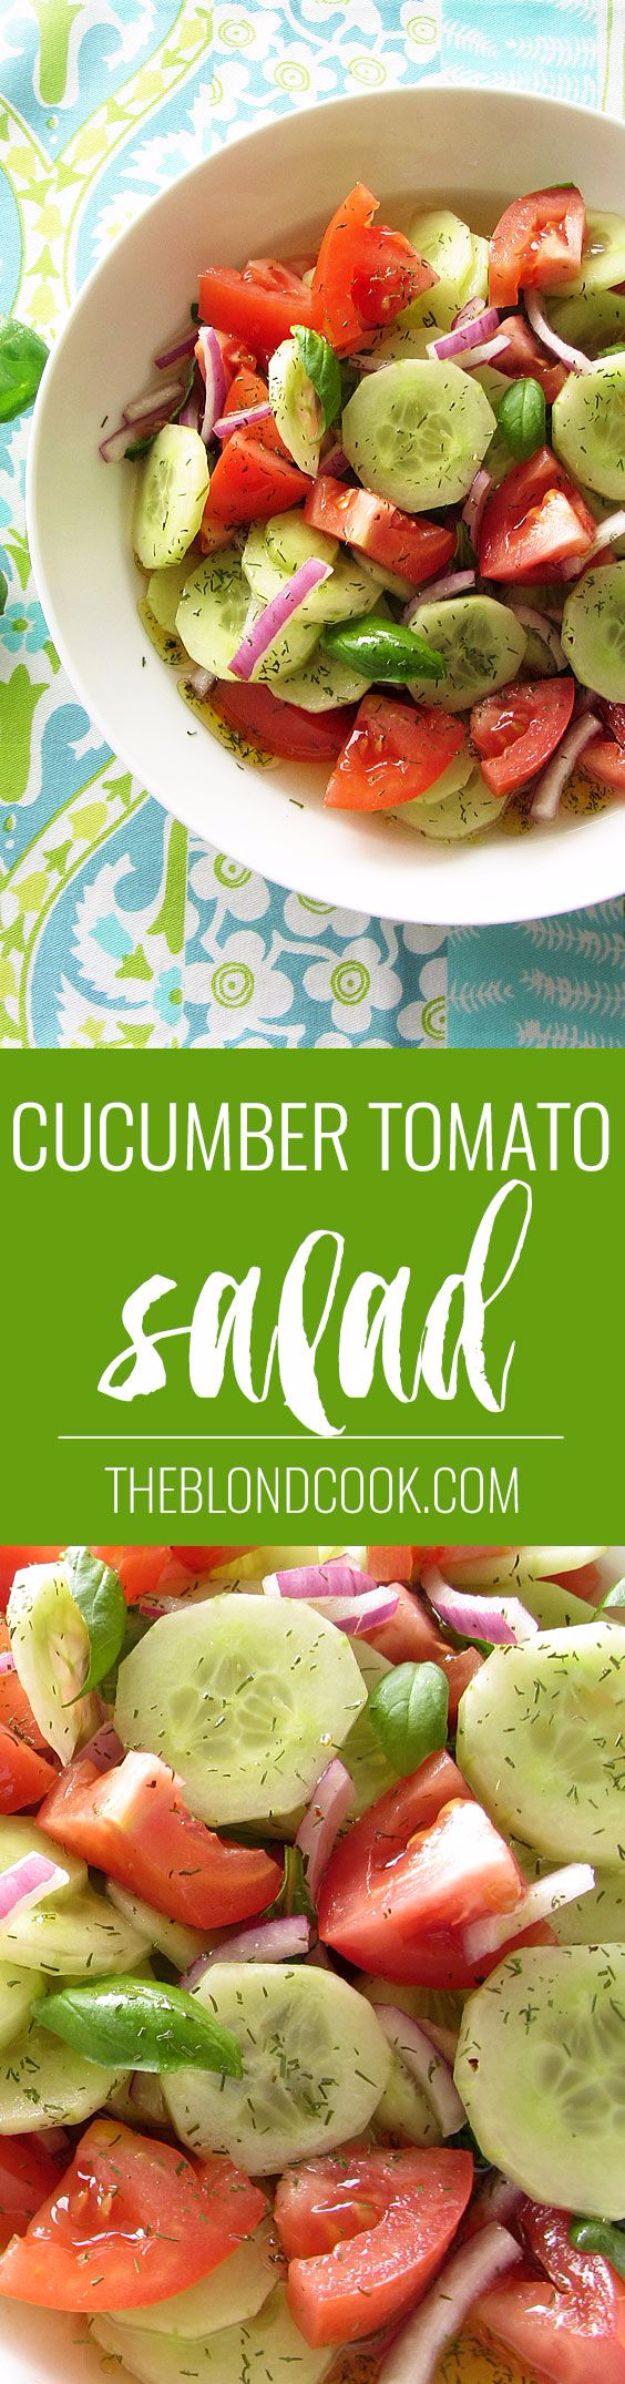 Best Easter Dinner Recipes - Cucumber Tomato Salad - Easy Recipe Ideas for Easter Dinners and Holiday Meals for Families - Side Dishes, Slow Cooker Recipe Tutorials, Main Courses, Traditional Meat, Vegetable and Dessert Ideas - Desserts, Pies, Cakes, Ham and Beef, Lamb - DIY Projects and Crafts by DIY JOY 